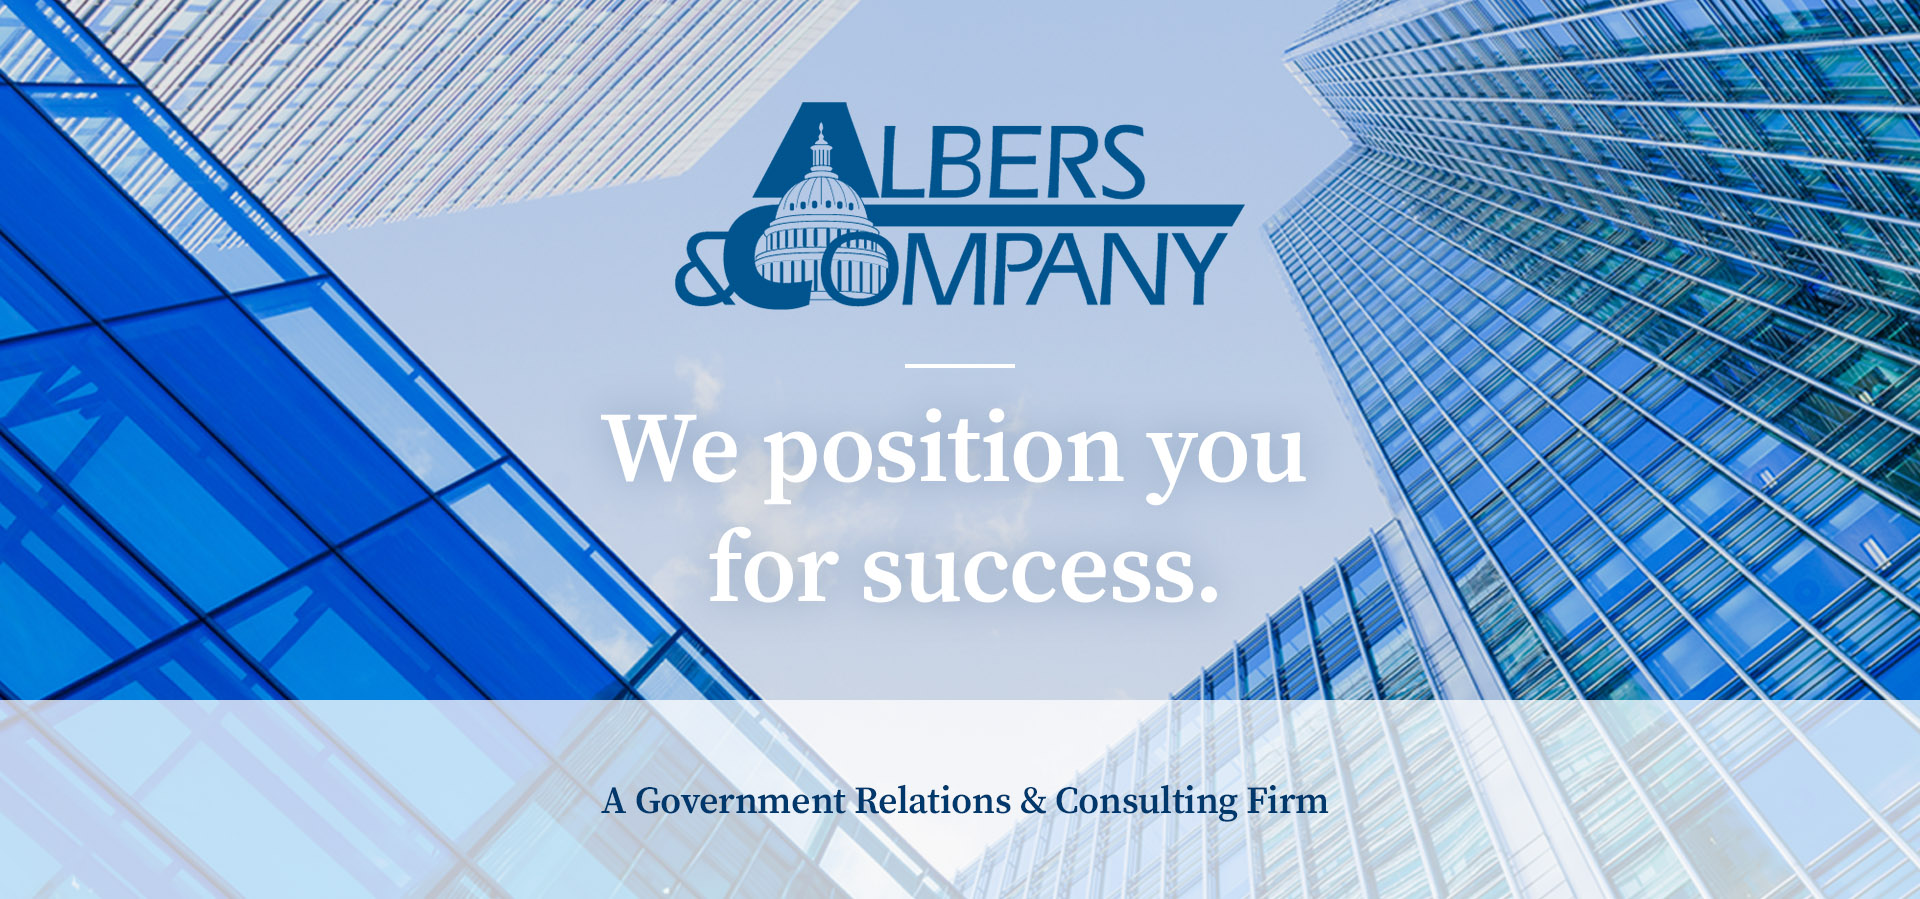 Albers and Company, Albers and co, dc consulting firm, government consulting firm, lobbying consultants, Arlington consulting firm, Virginia consulting firm, Virginia lobbying firm